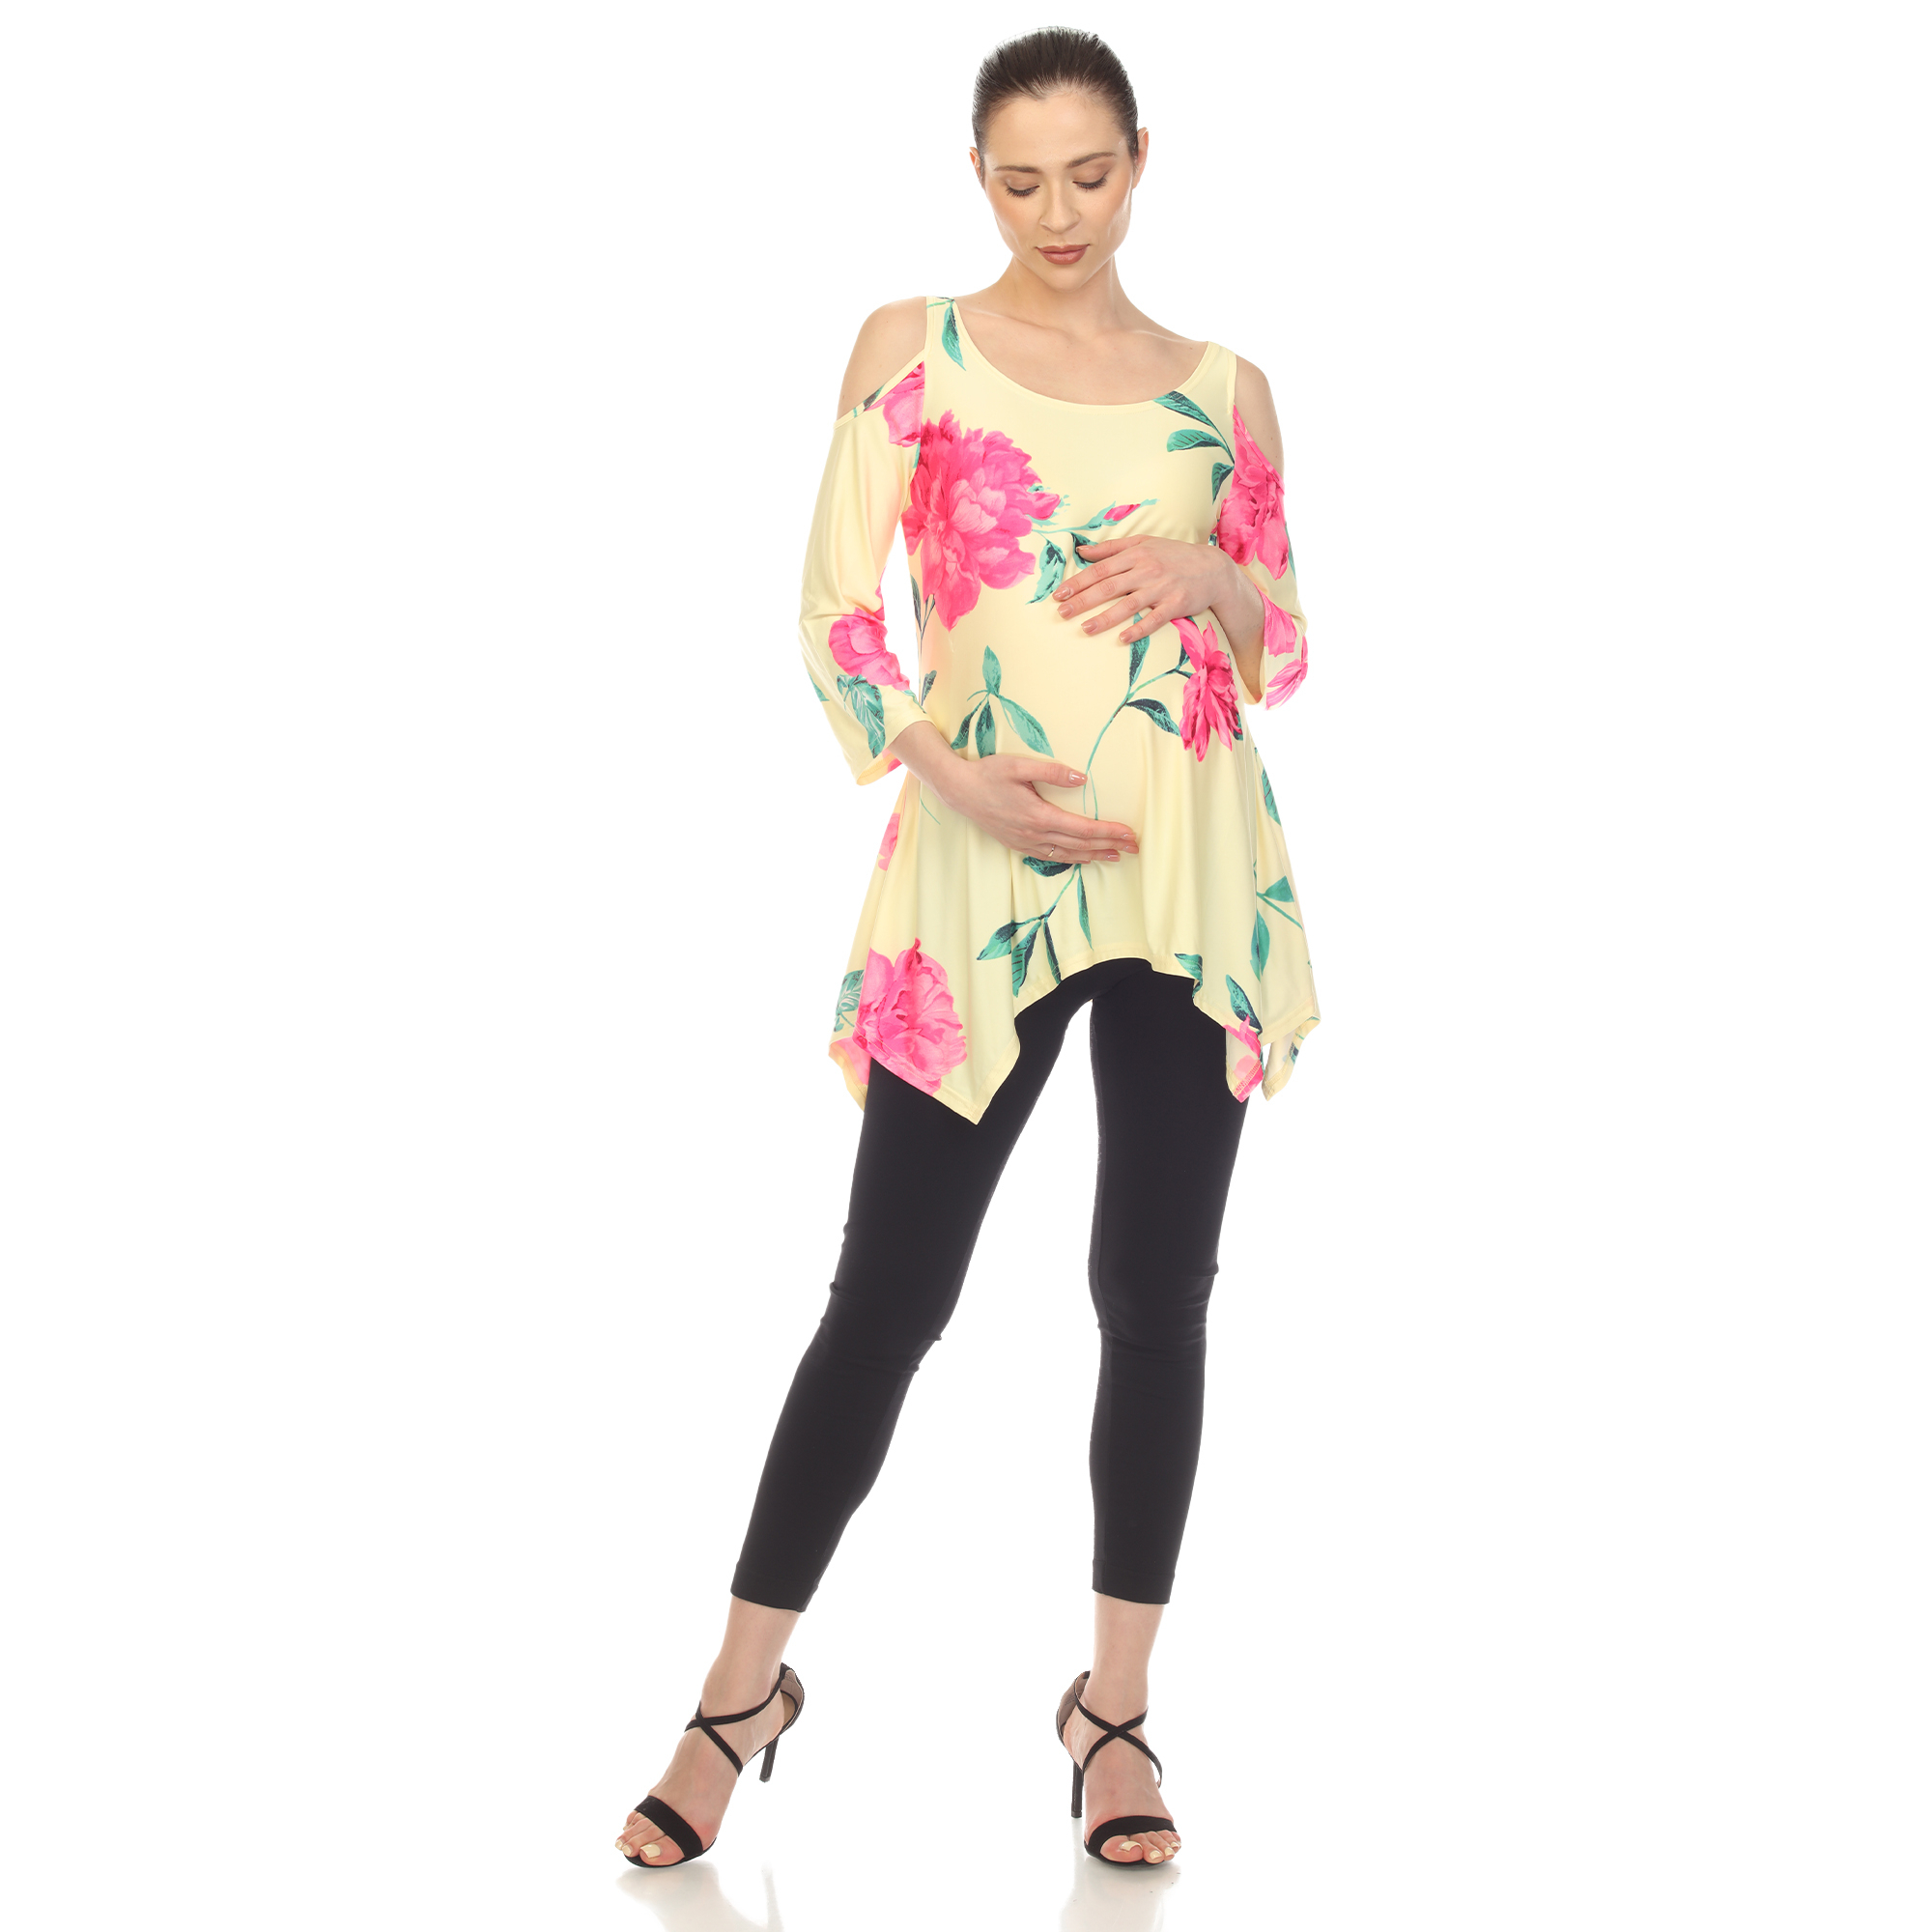 White Mark Women's Maternity Floral Cold Shoulder Tunic Top - Yellow/Pink, 1X